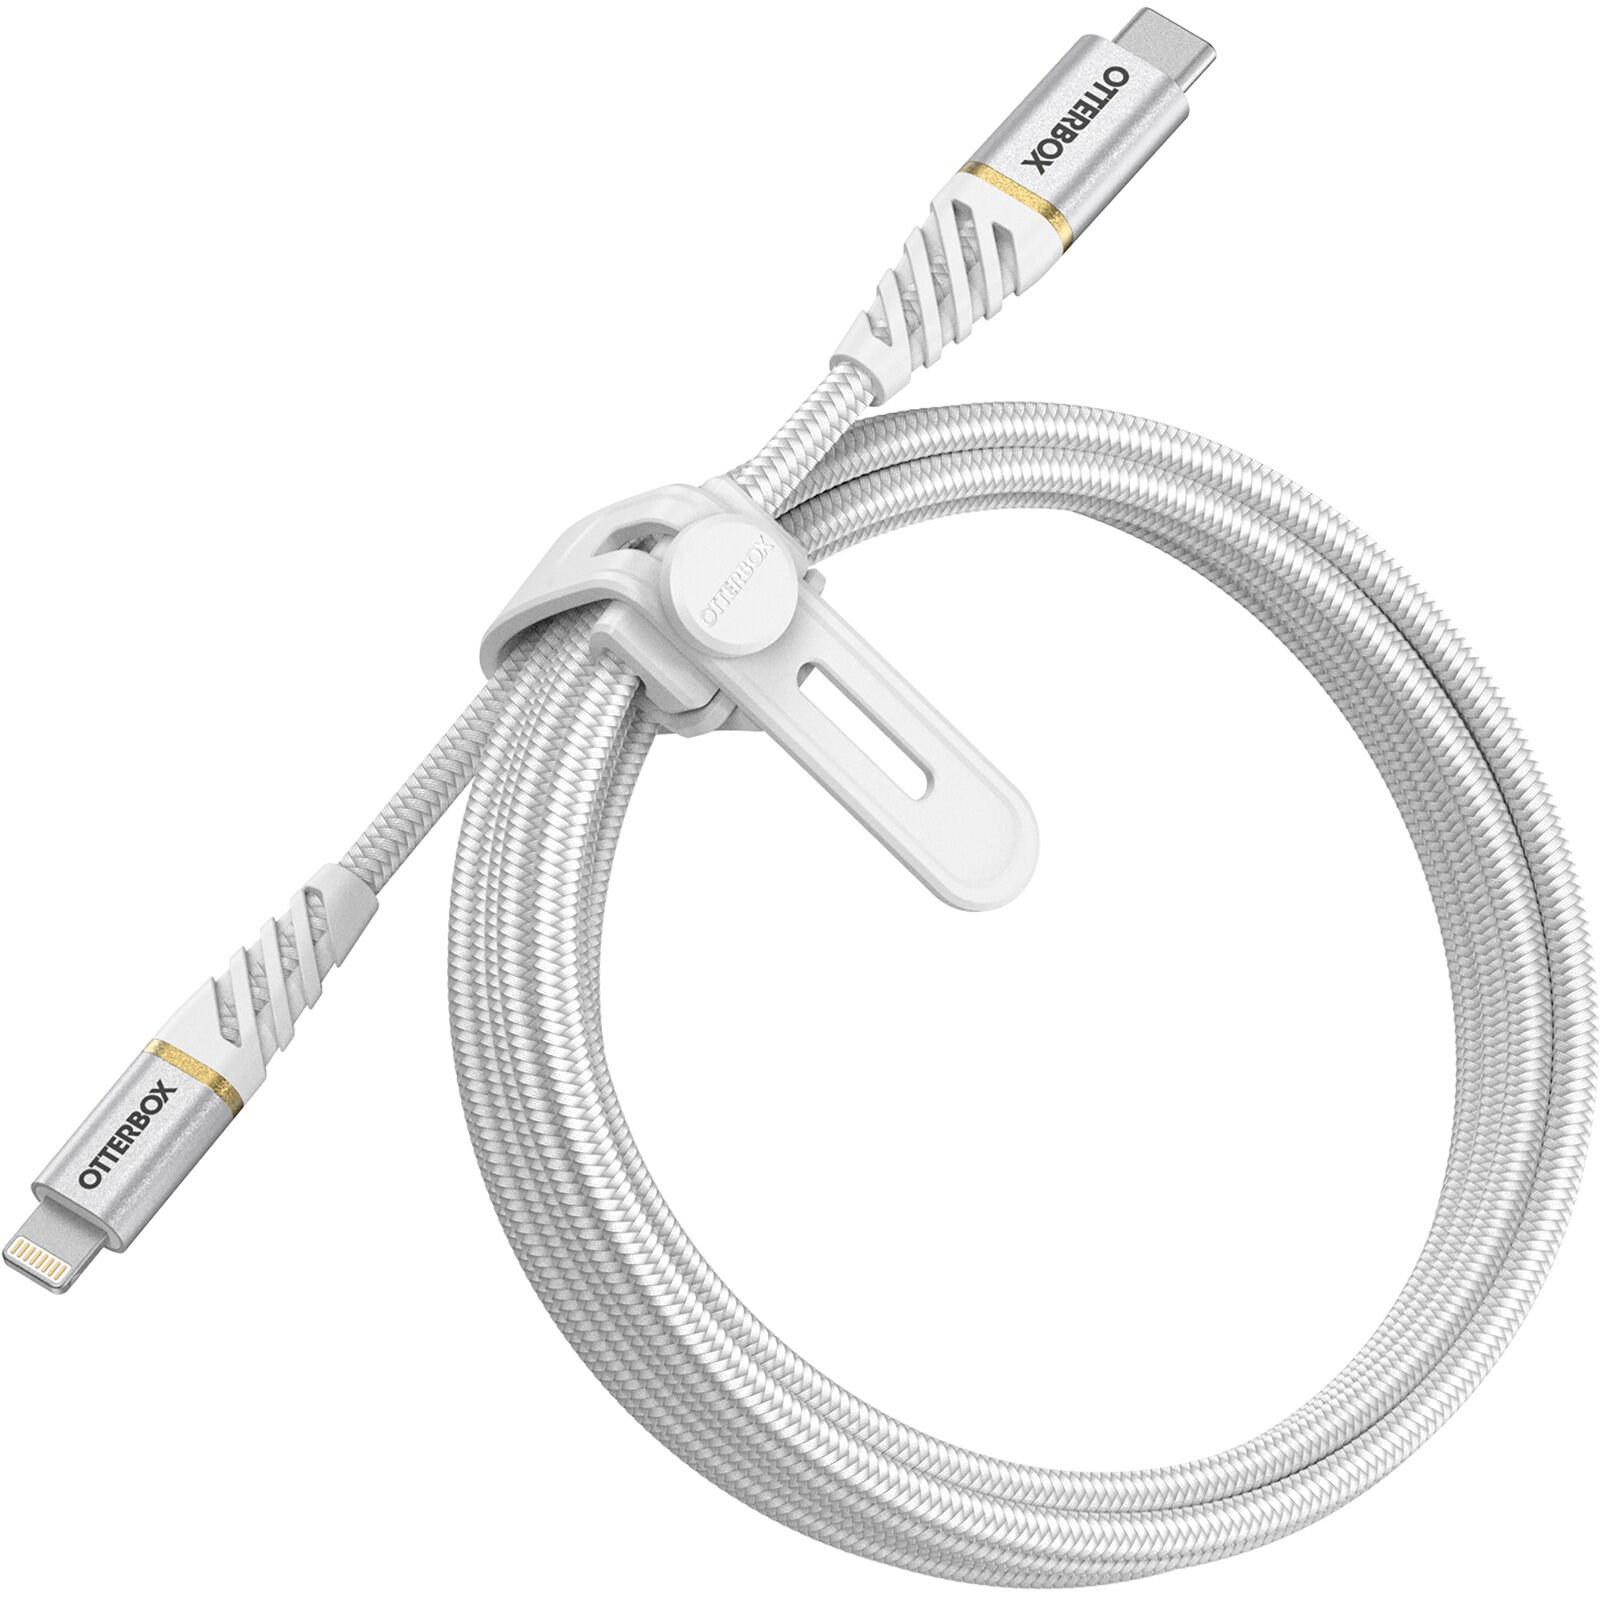 USB-C to Lightning Premium Fast Charge Cable 1m White